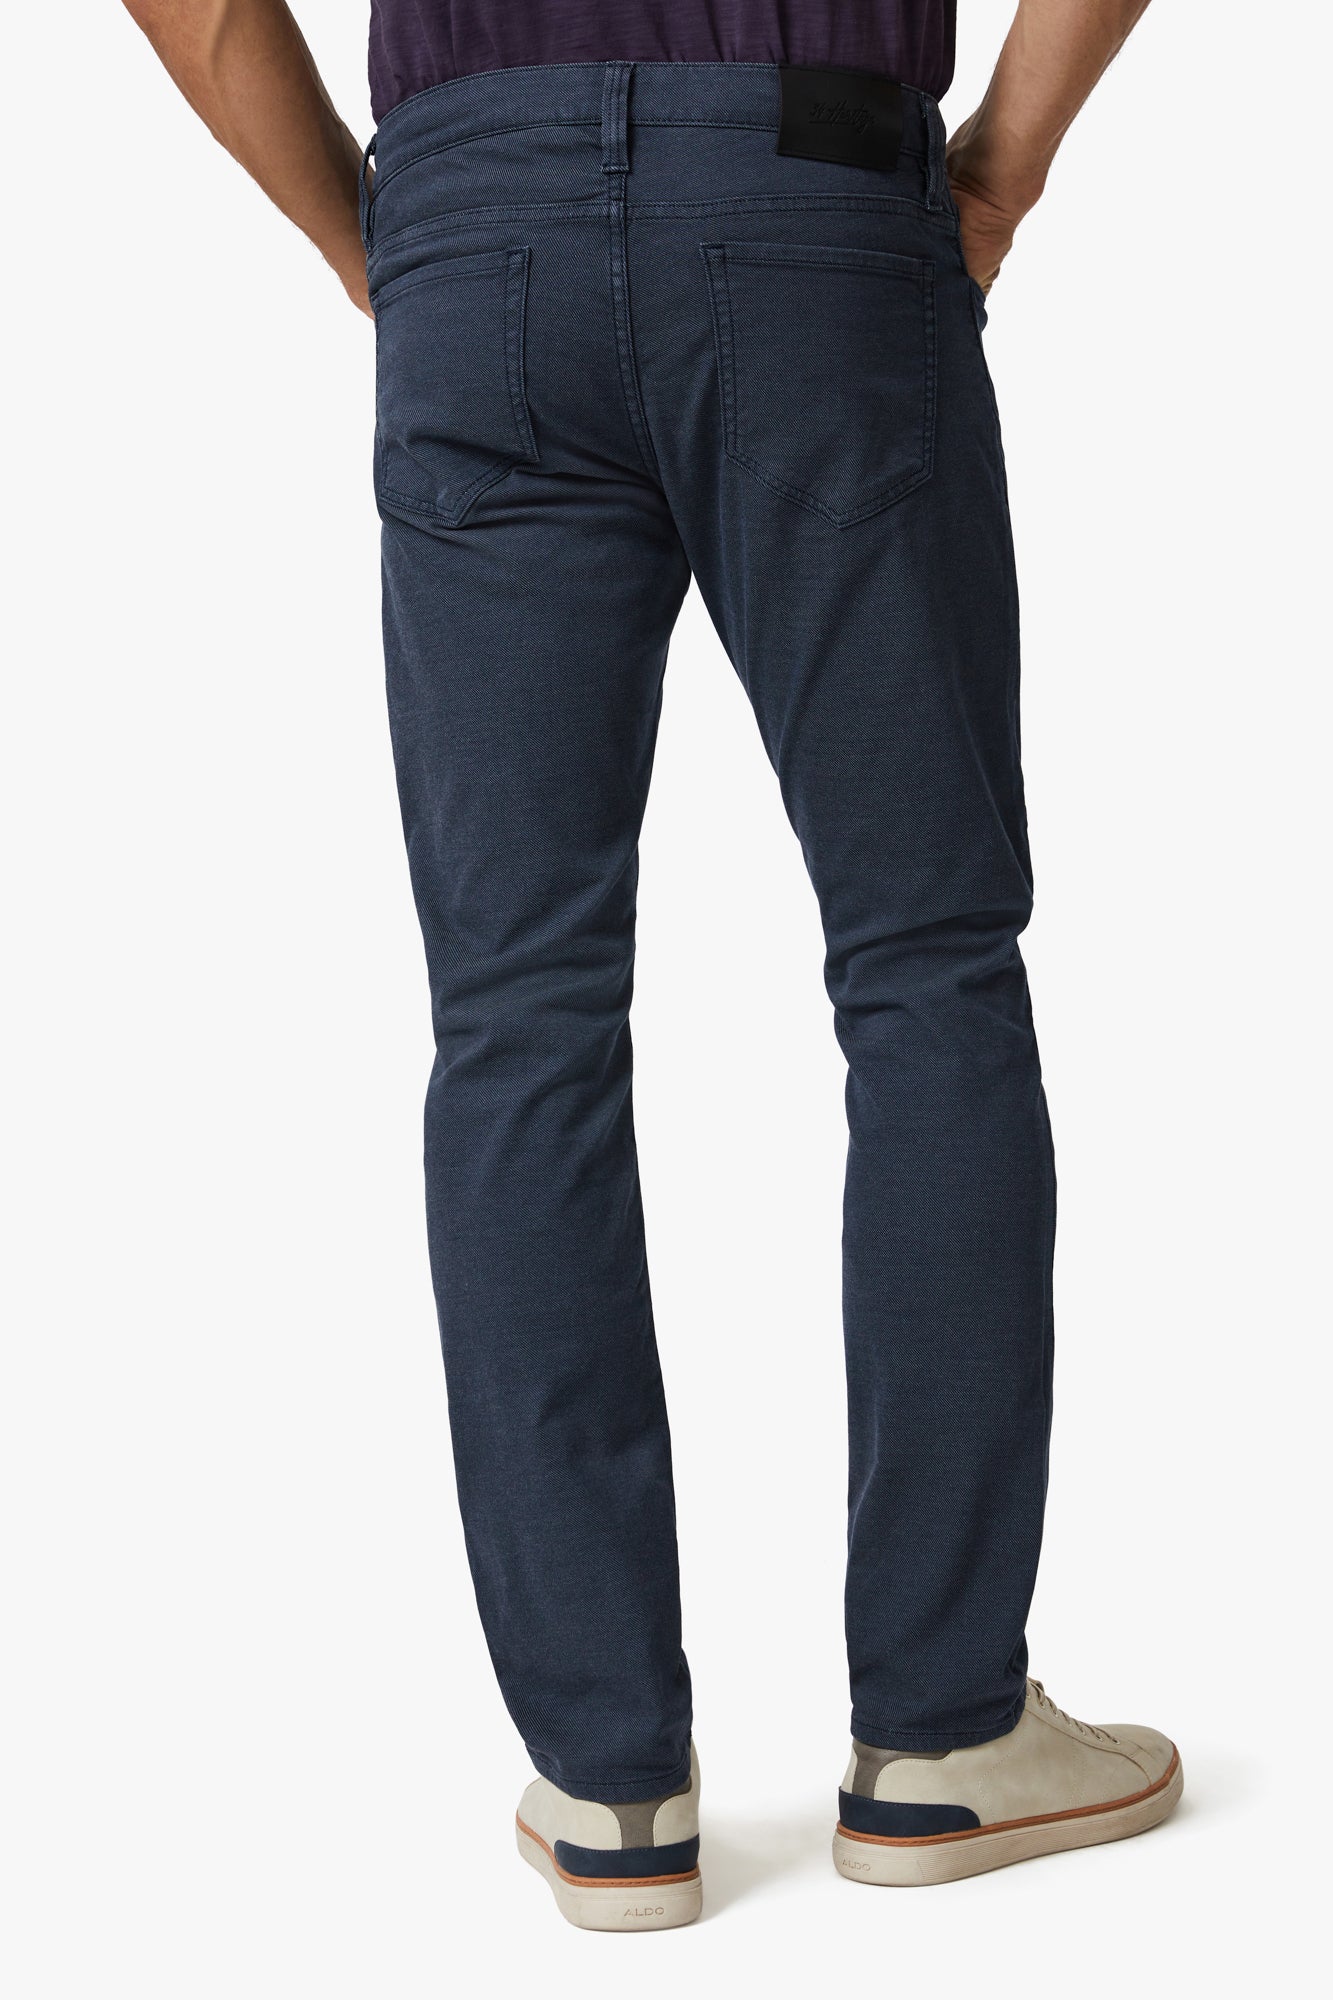 Cool Tapered Leg Pants In Navy CoolMax Image 4